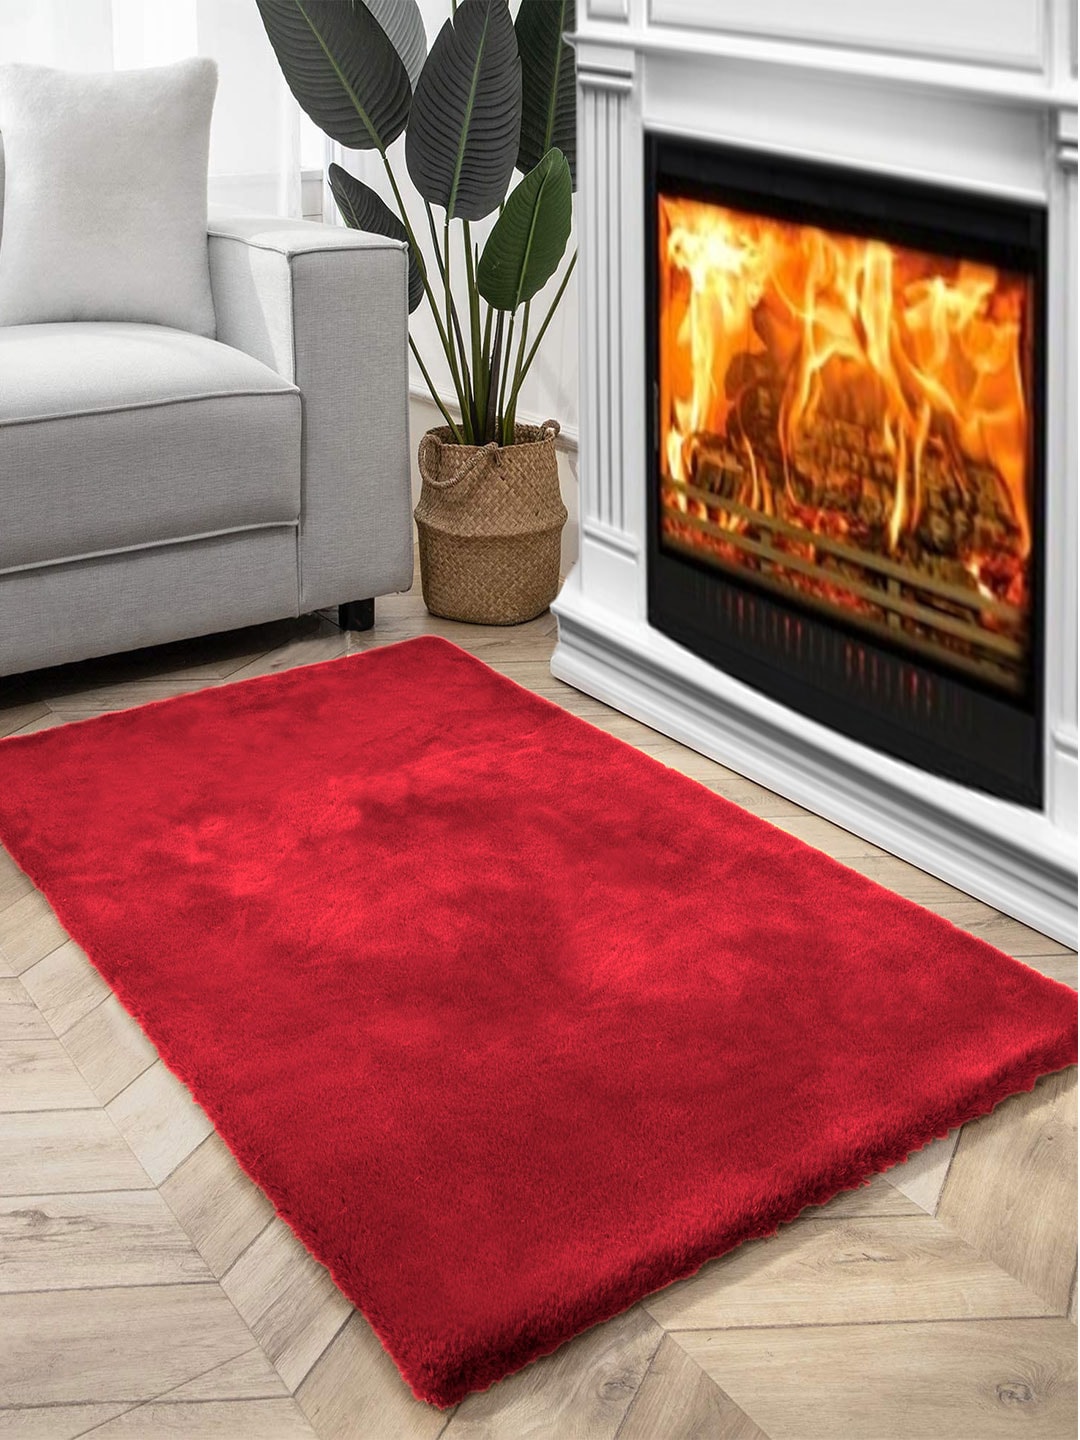 FI Maroon Polycotton Solid Bath Rugs Price in India